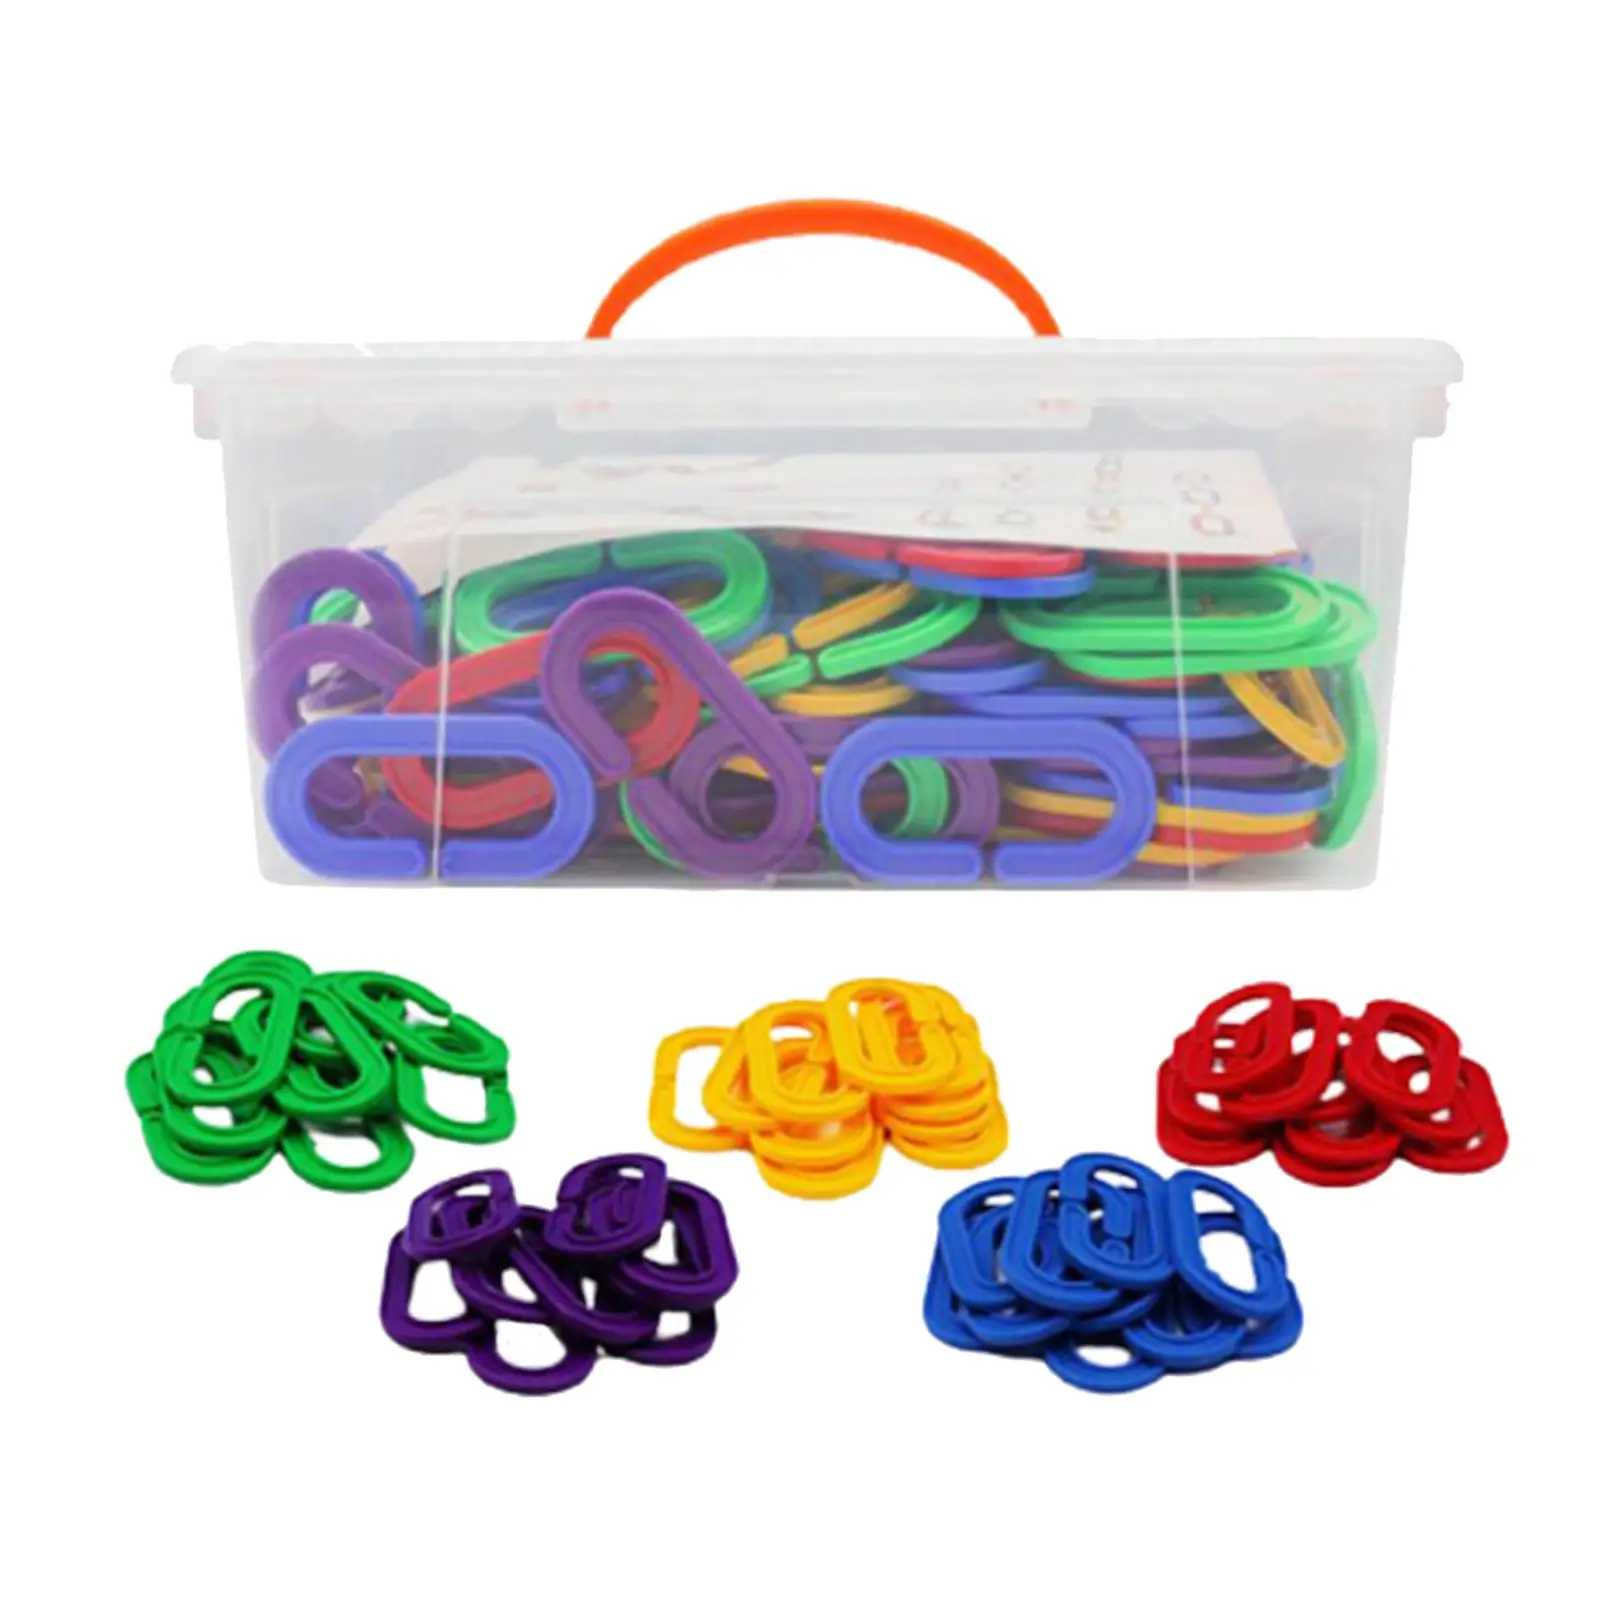 150Pcs Chain Links Counting and Sorting Colorful Links for Playroom